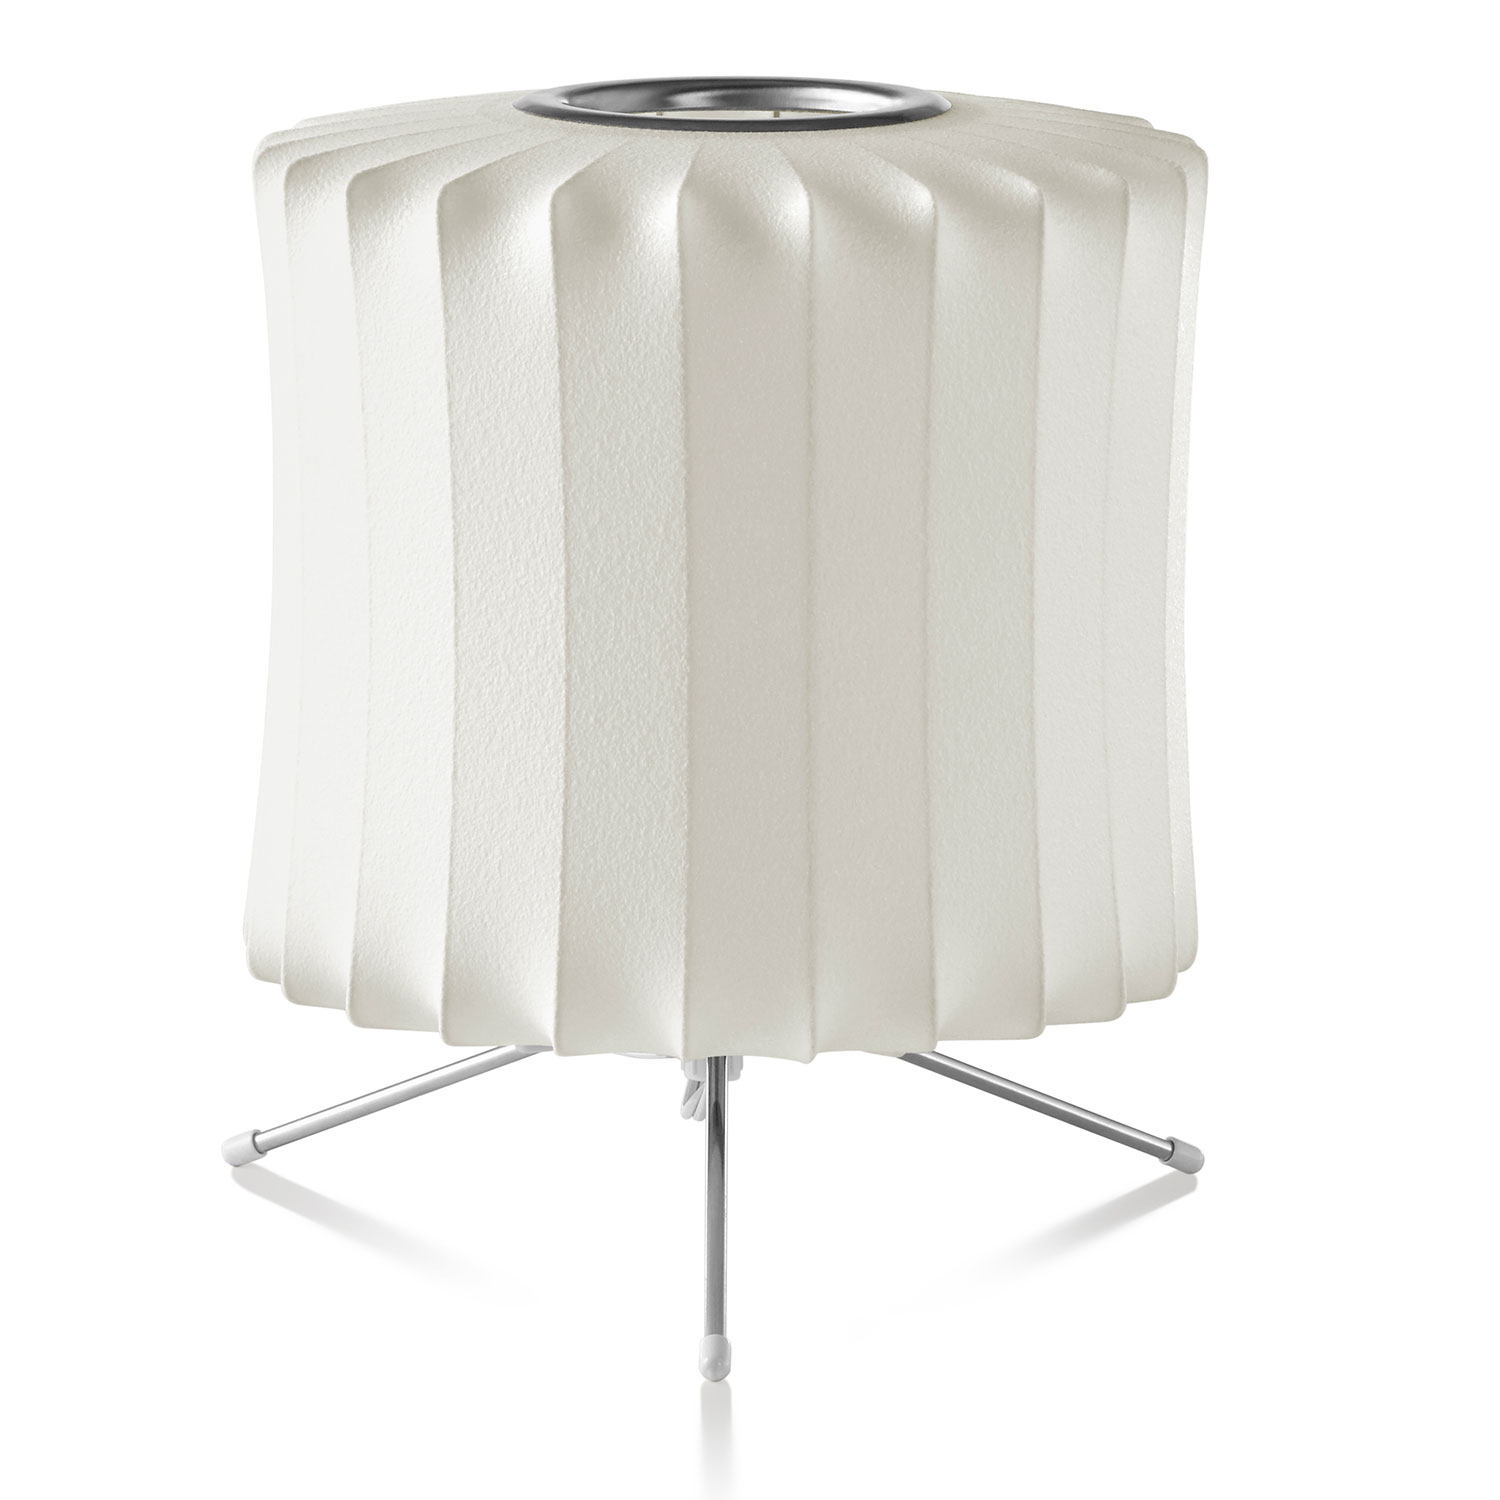 Lantern Tripod Table Lamp By Nelson, George Nelson Bubble Table Lamp